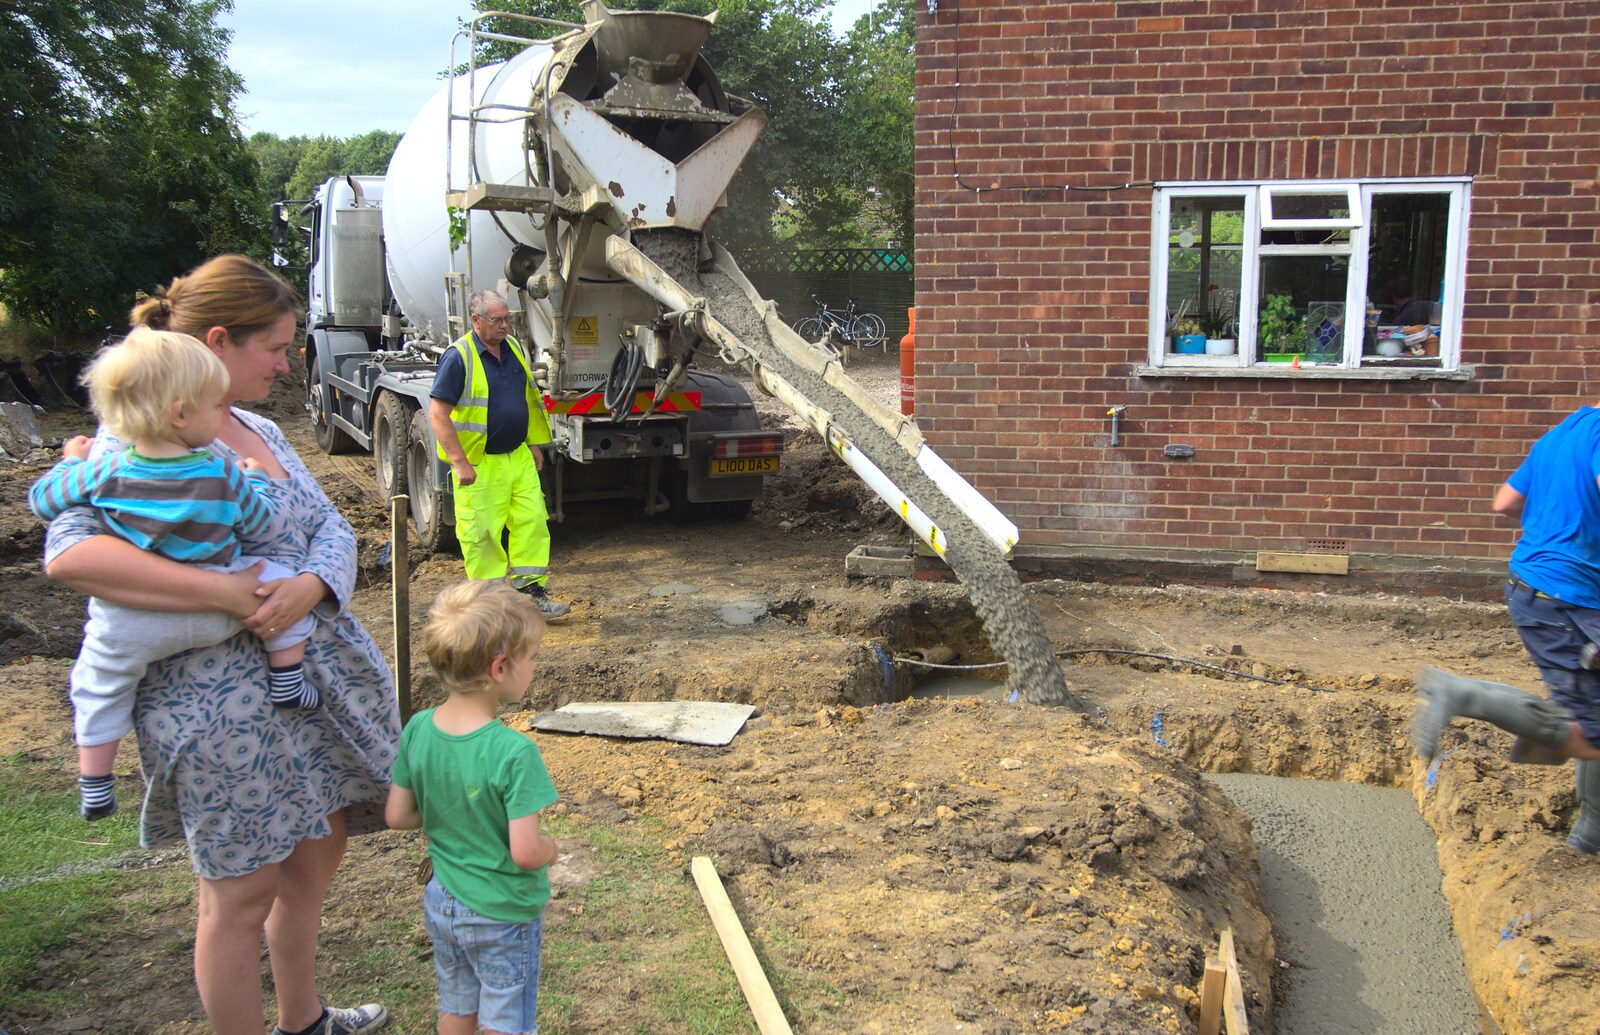 More concrete is poured in from Grand Designs: Building Commences, Brome, Suffolk - 8th August 2013